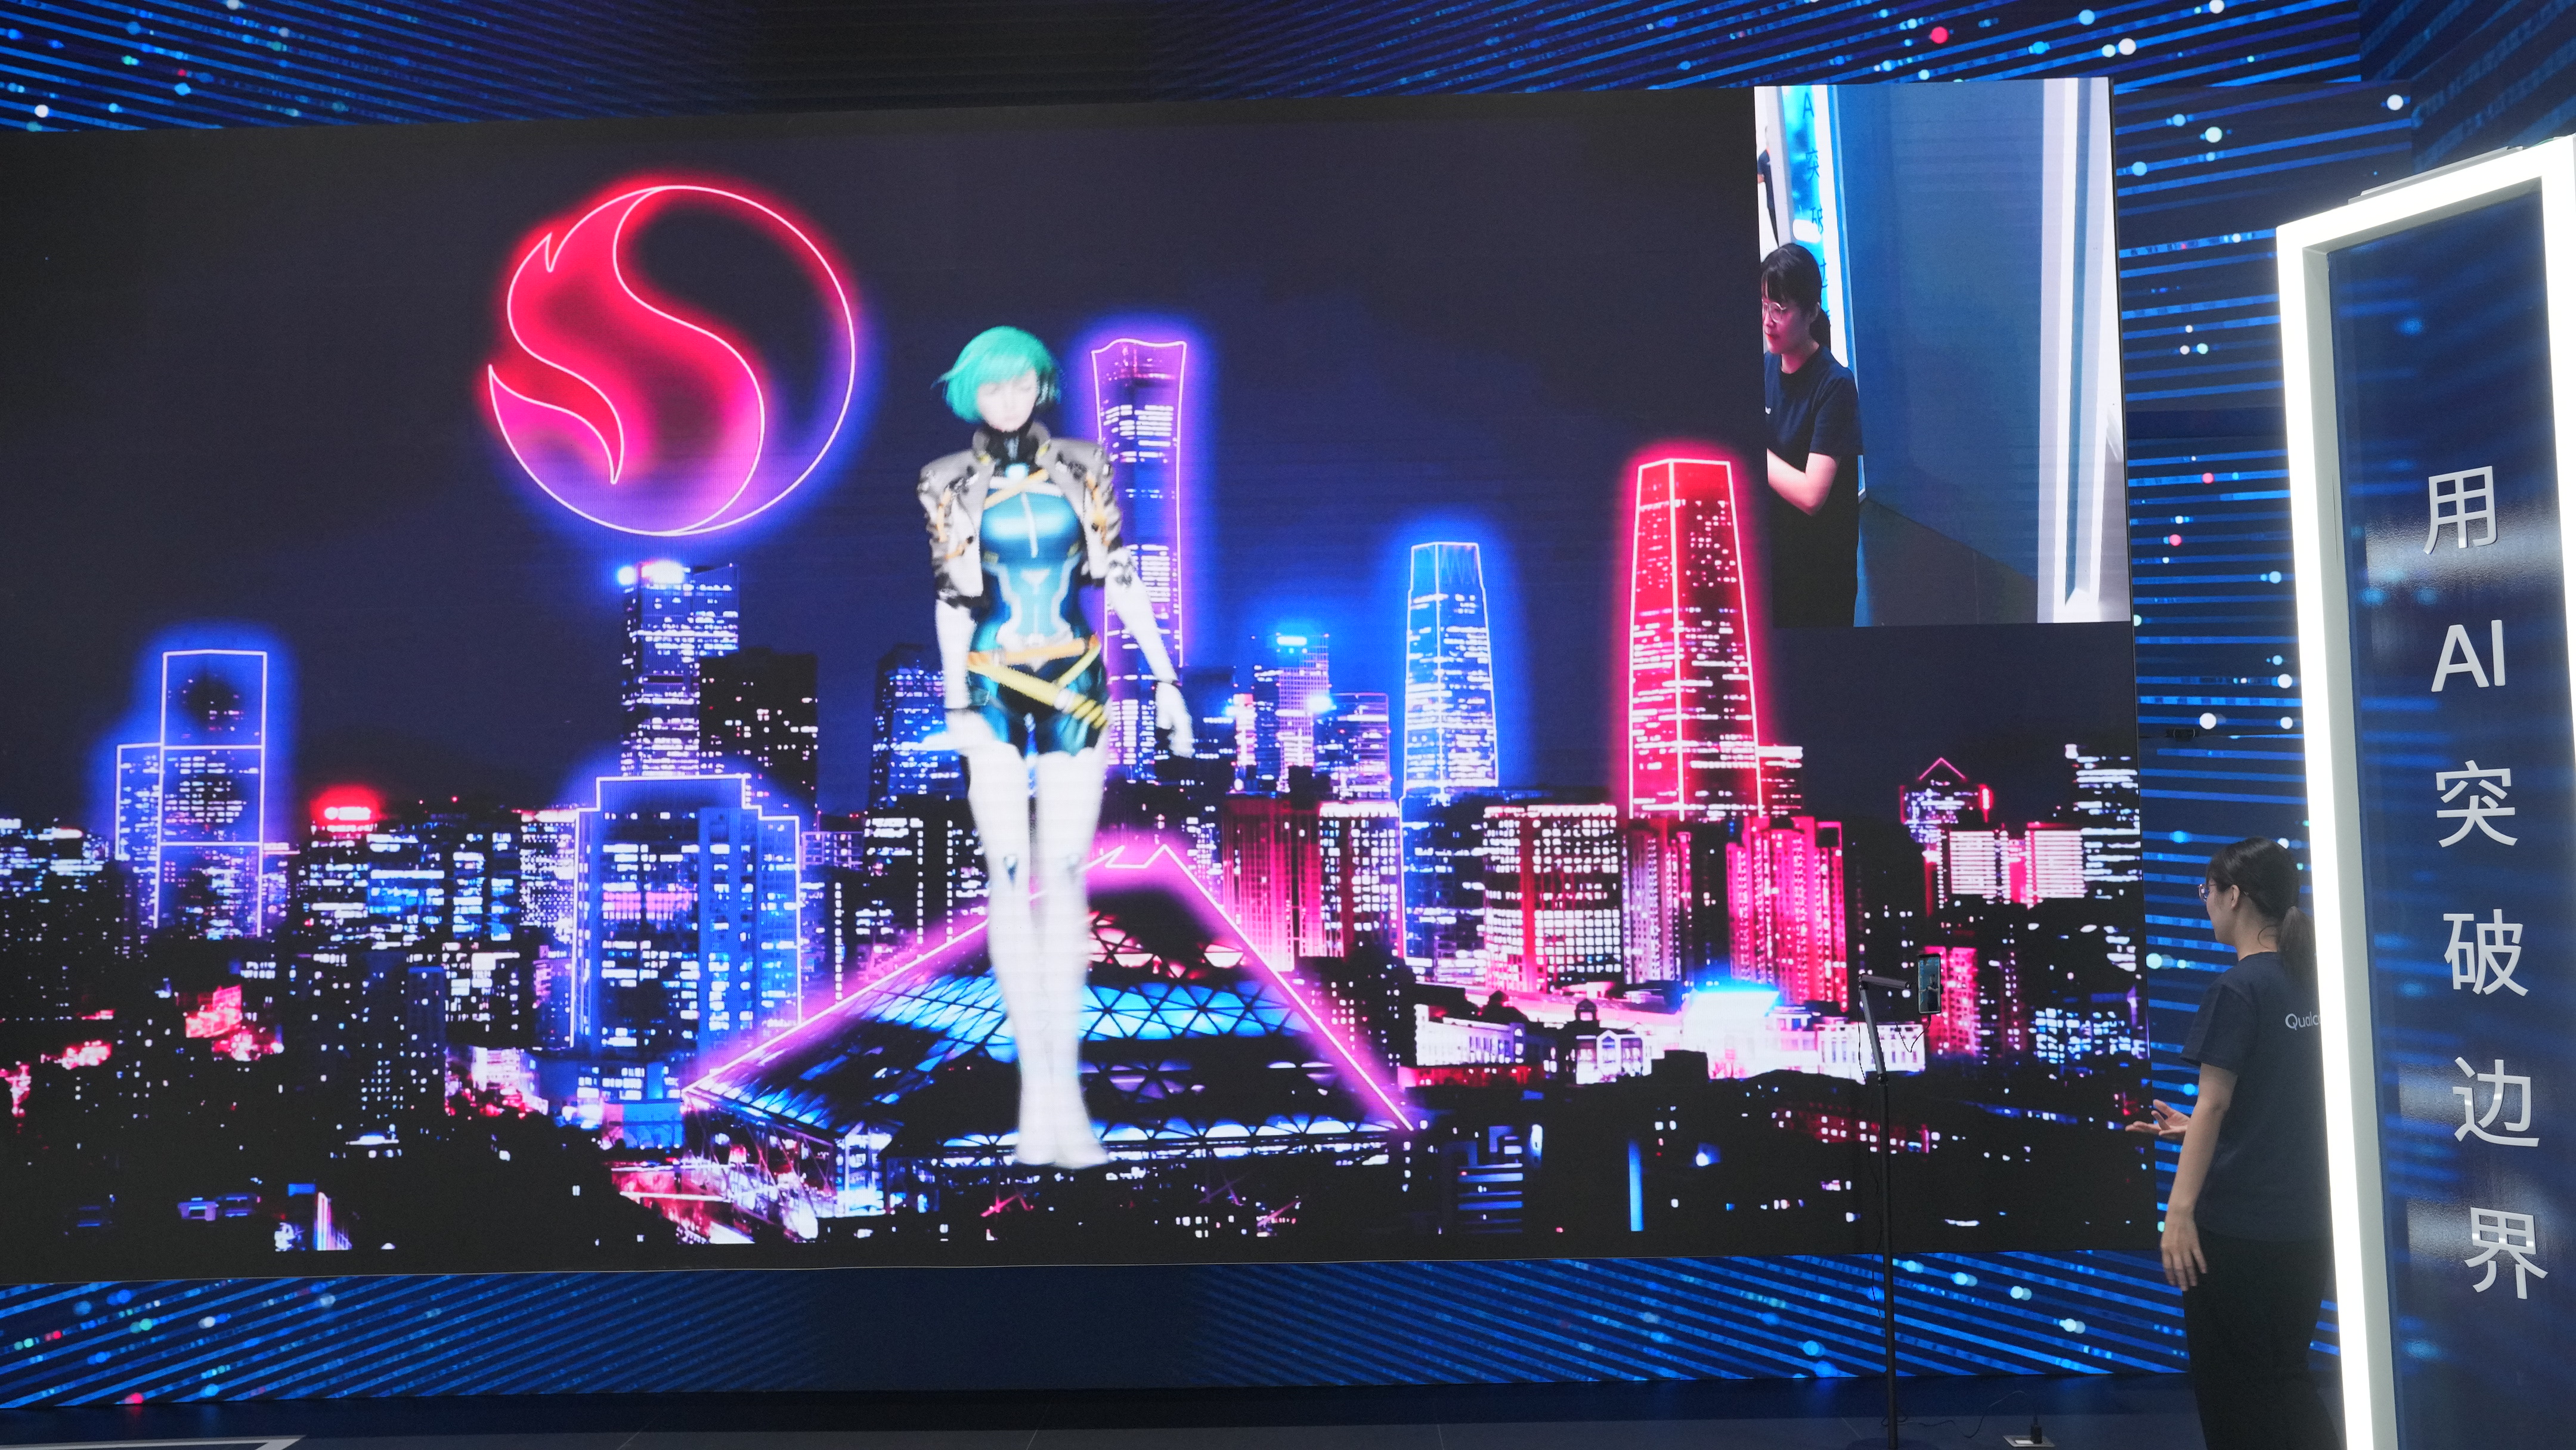 Dancer's moves are projected as comic image on the screen.